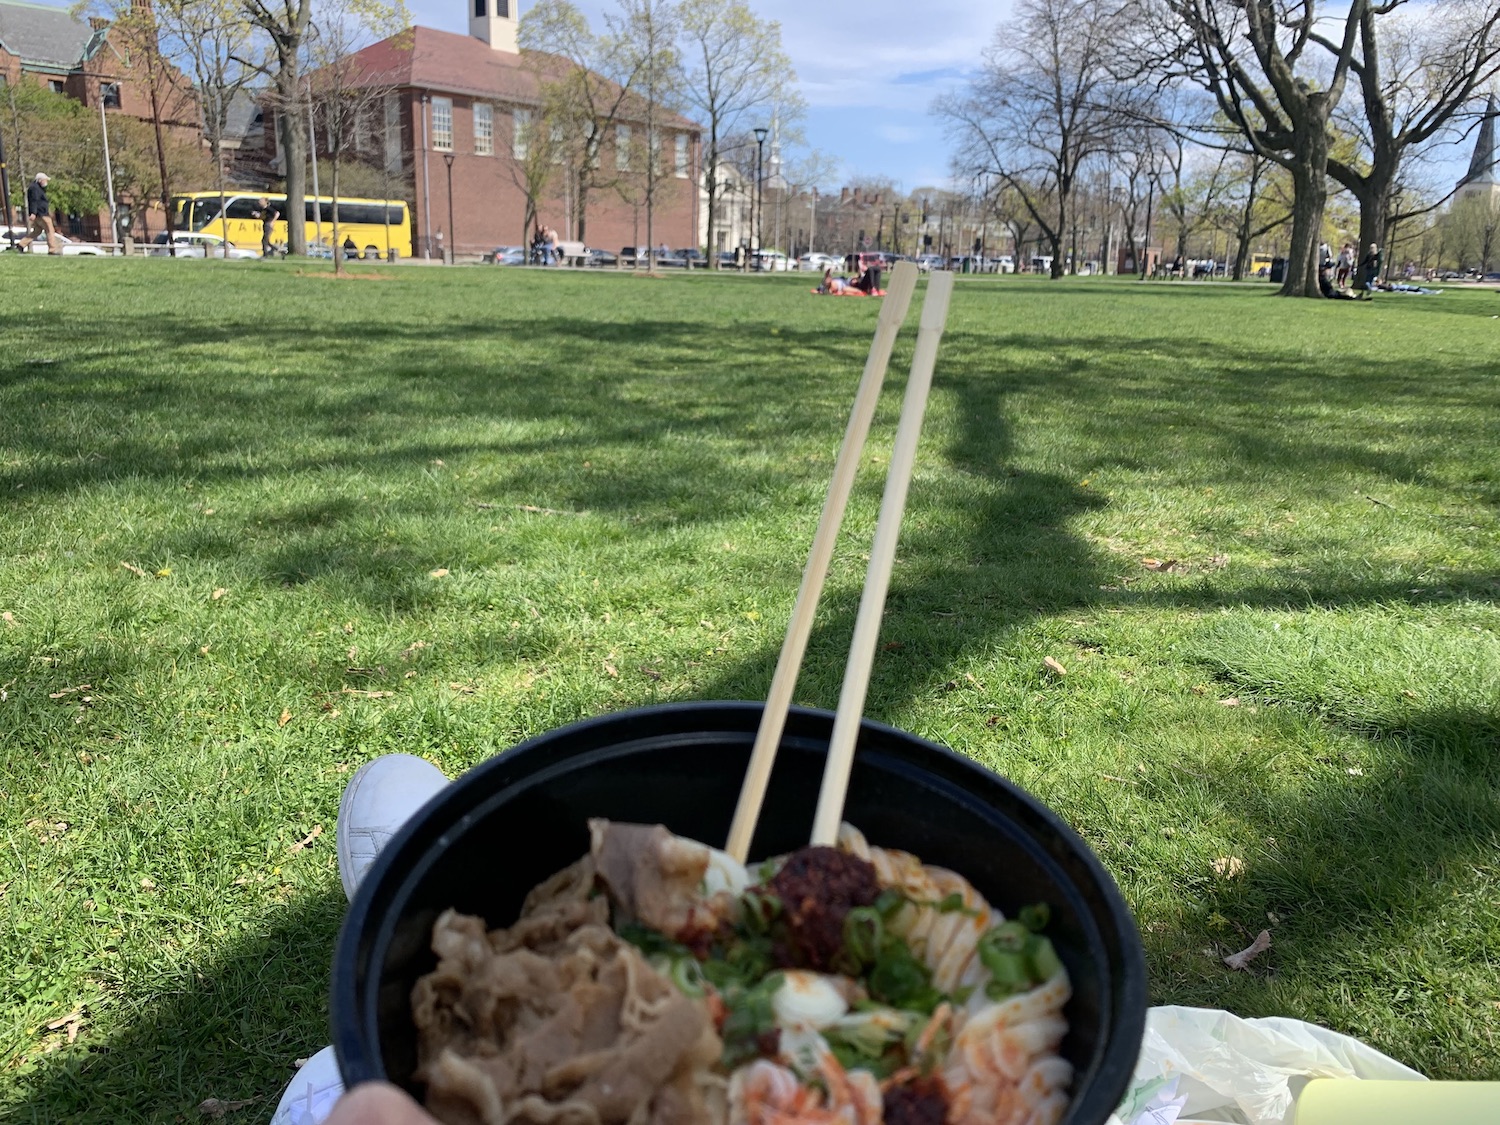 Dates by myself eating udon in the park.